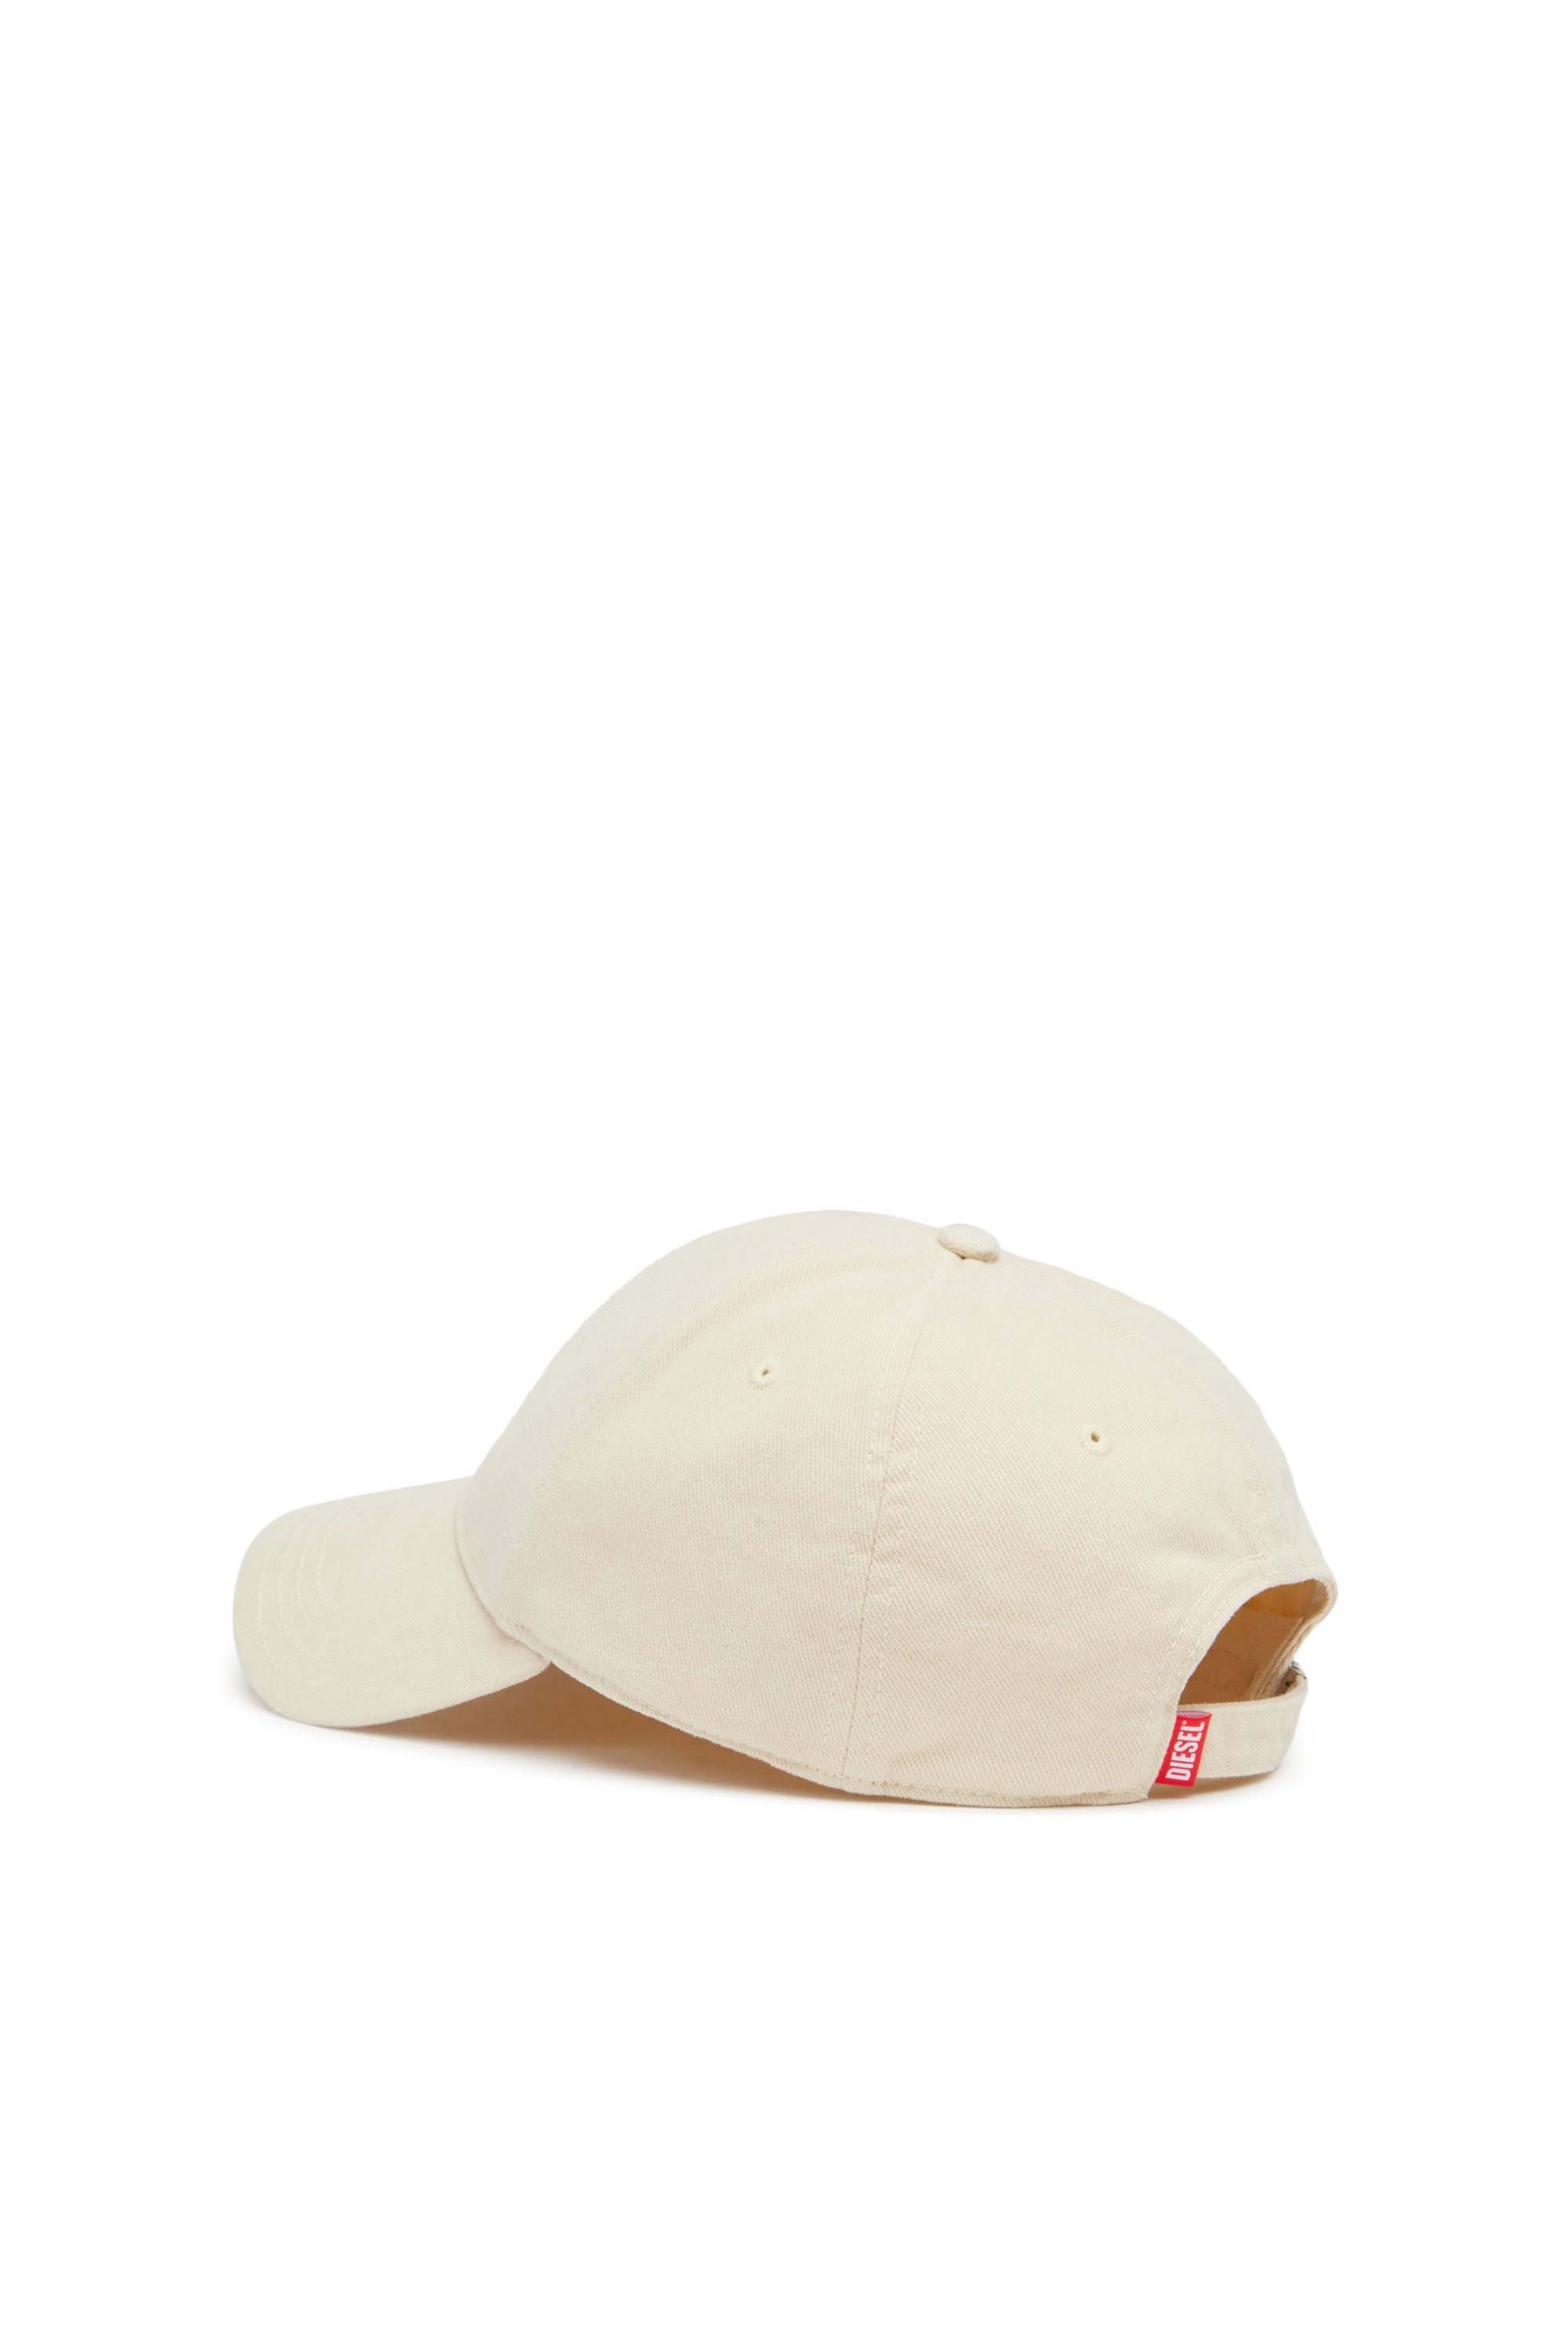 Diesel - C-RUN-WASH, Male Baseball cap in washed cotton twill in White - Image 2